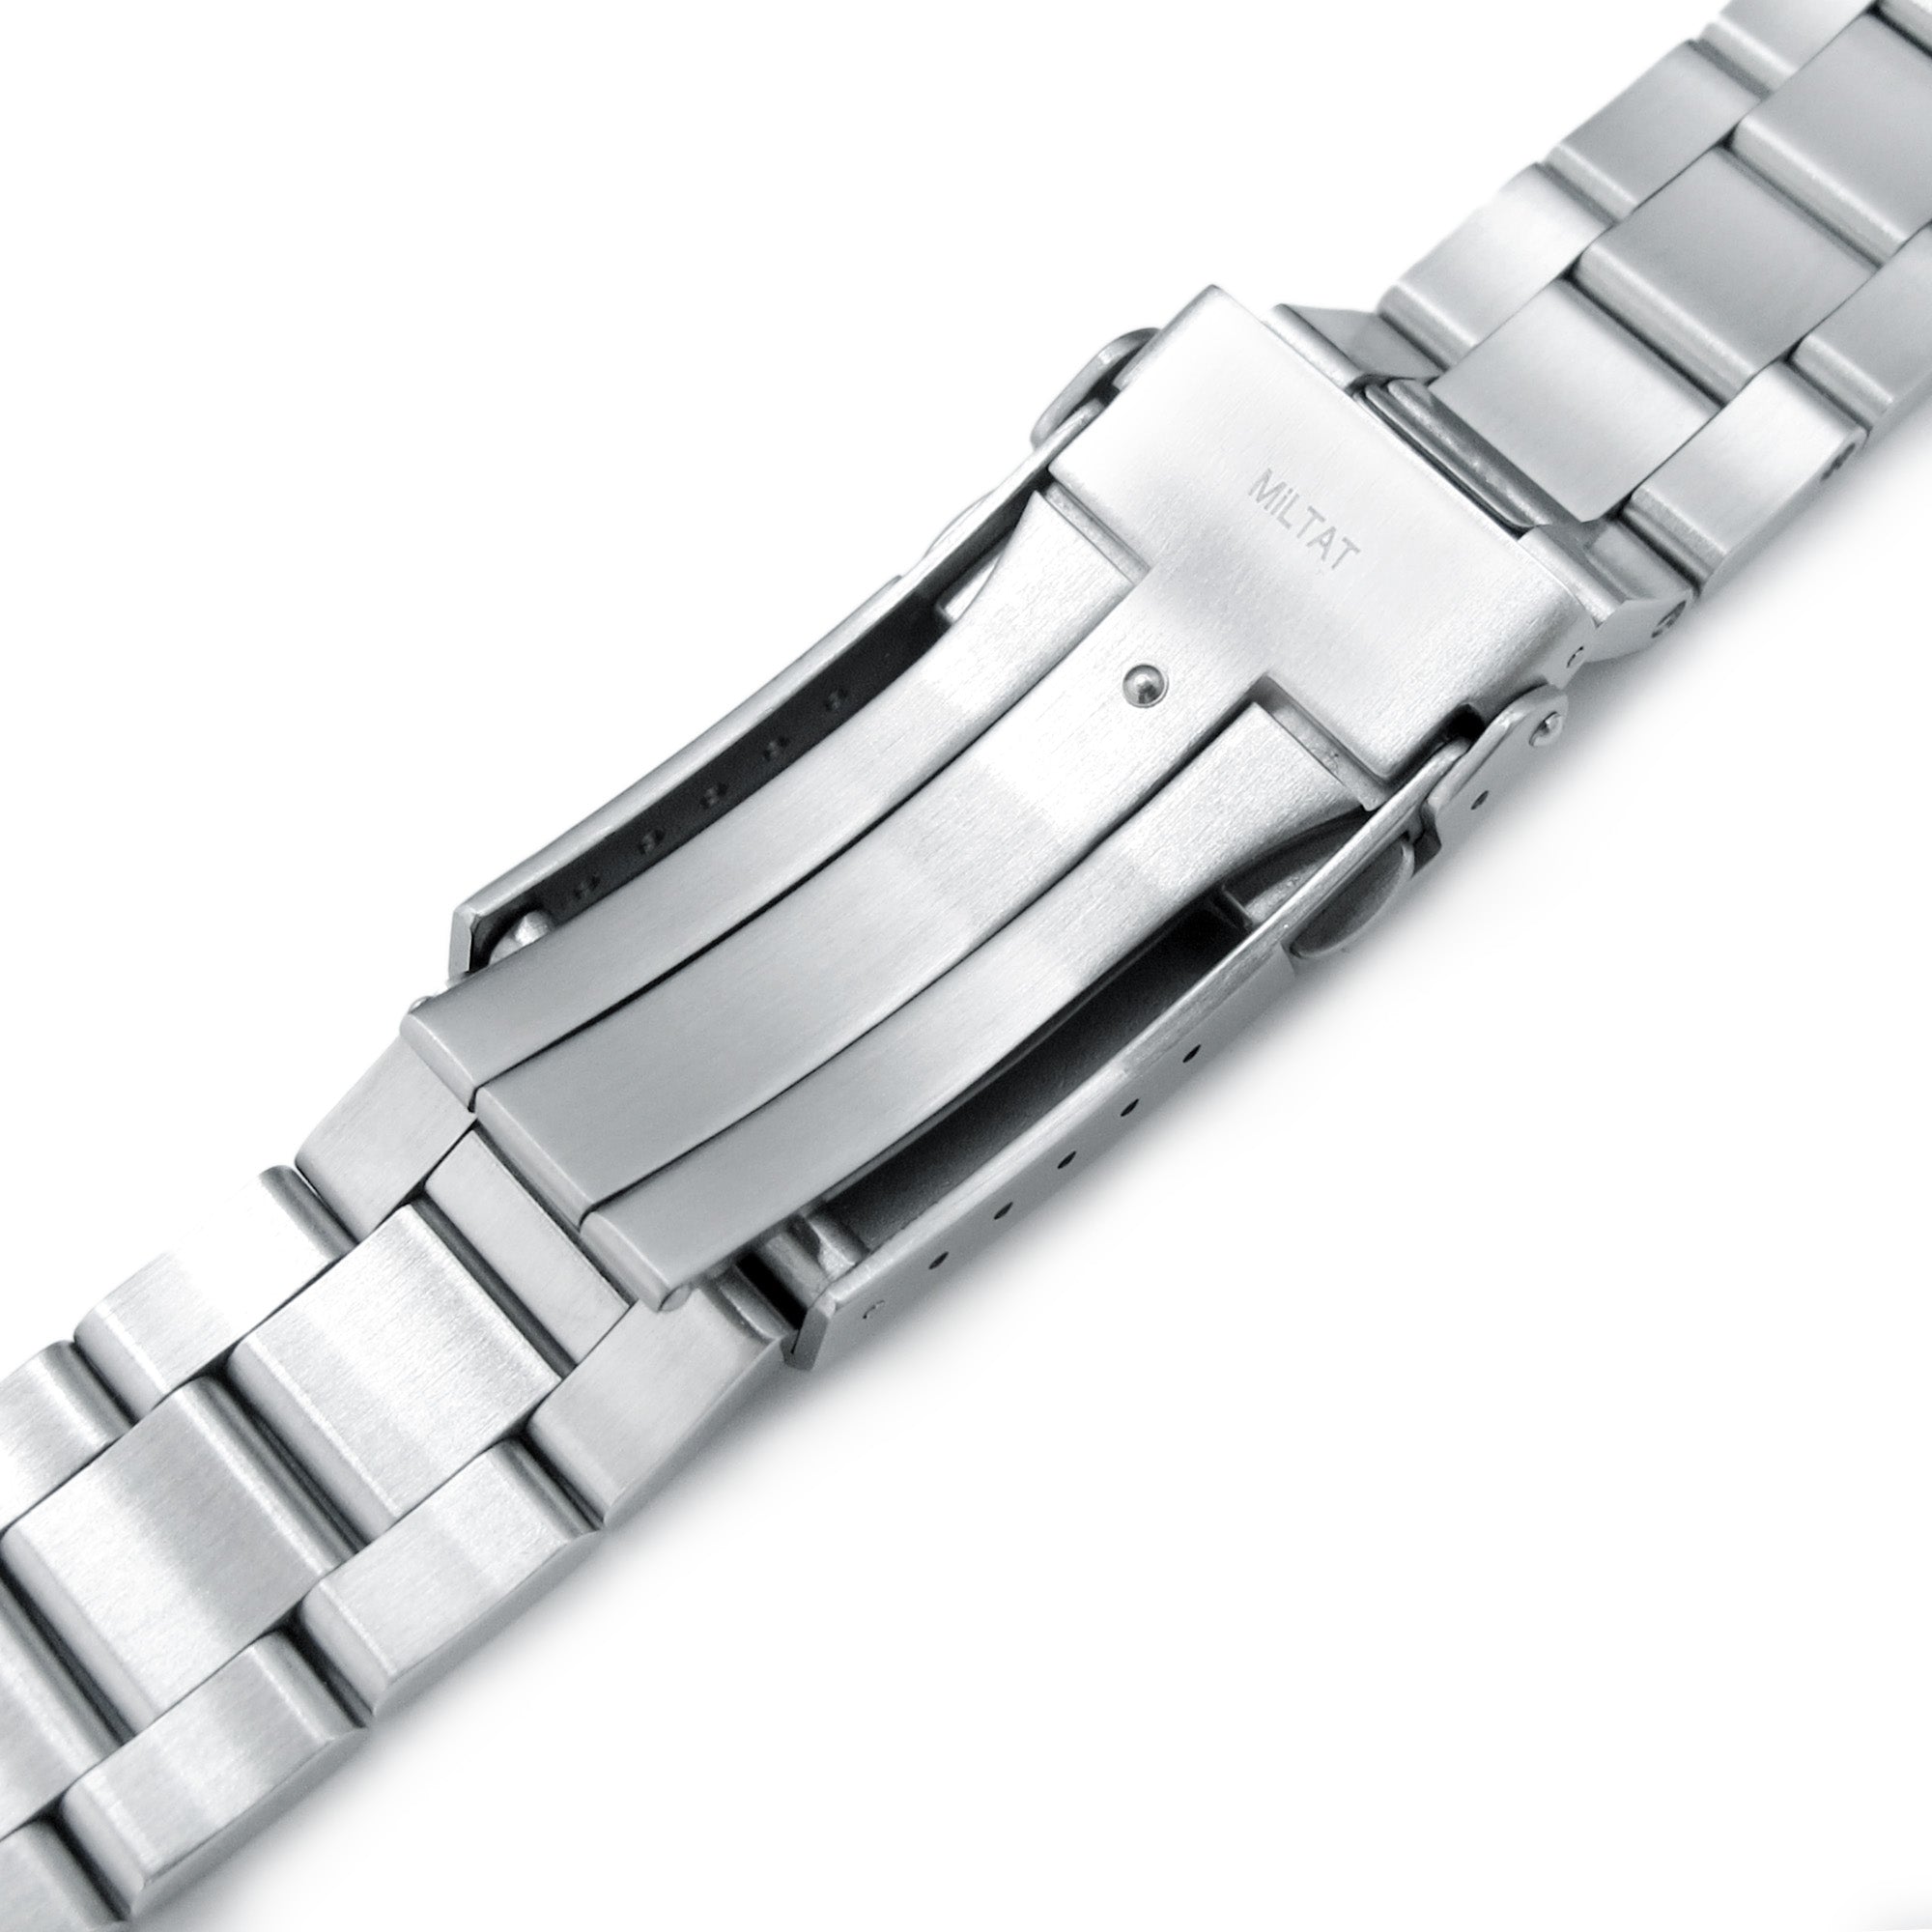 20mm Retro Razor 316L Stainless Steel Watch Bracelet for Seiko Mini Turtles SRPC35 Brushed V-Clasp Strapcode Watch Bands